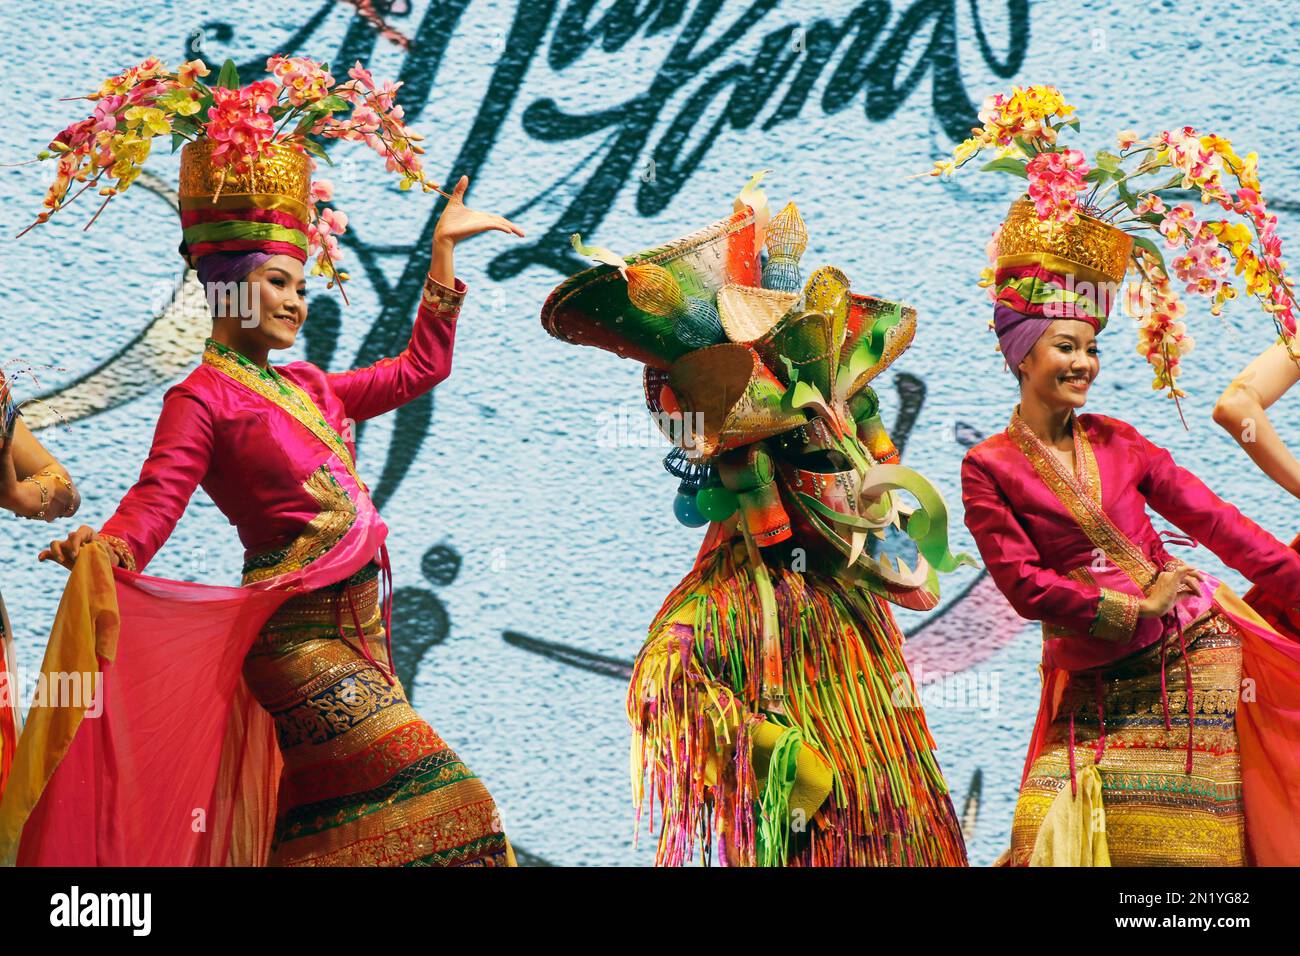 Dubai, United Arab Emirates - March 15, 2022 thai traditional dancers with colorful authentic costume in a stage Stock Photo